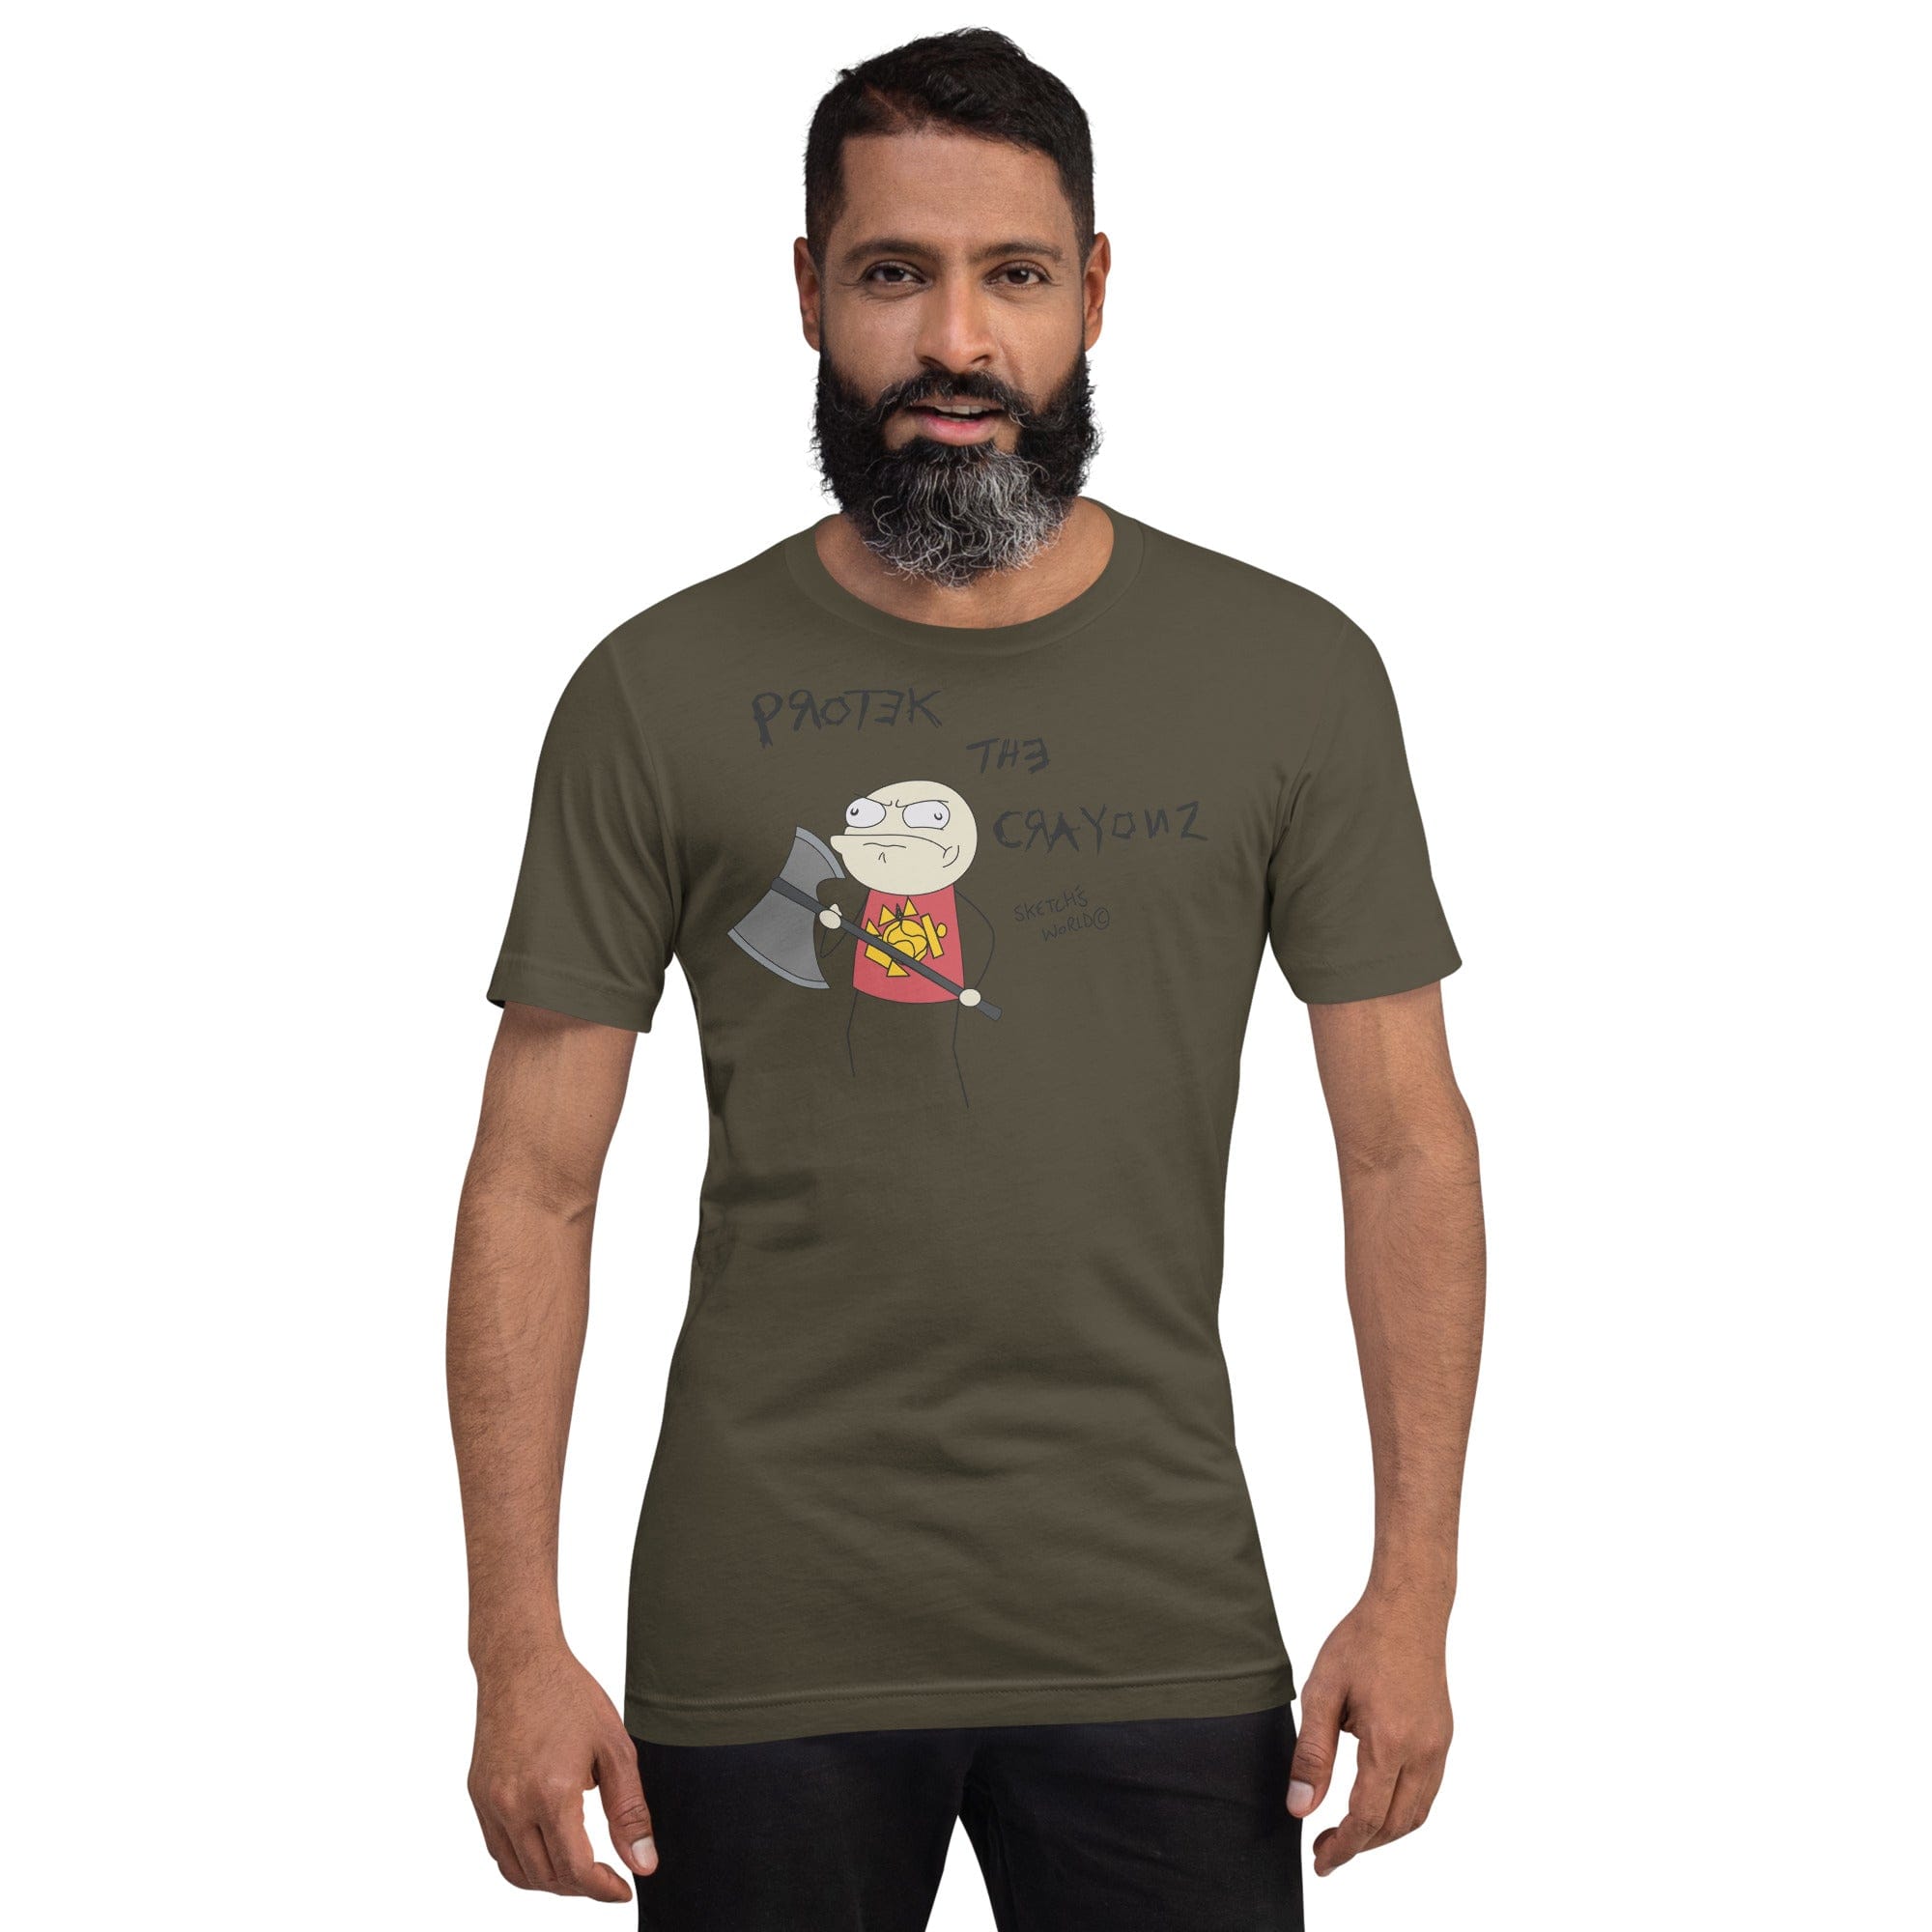 Tactical Gear Junkie Army / S Sketch's World © Officially Licensed - Protect the Crayonz Marine Unisex T-Shirt